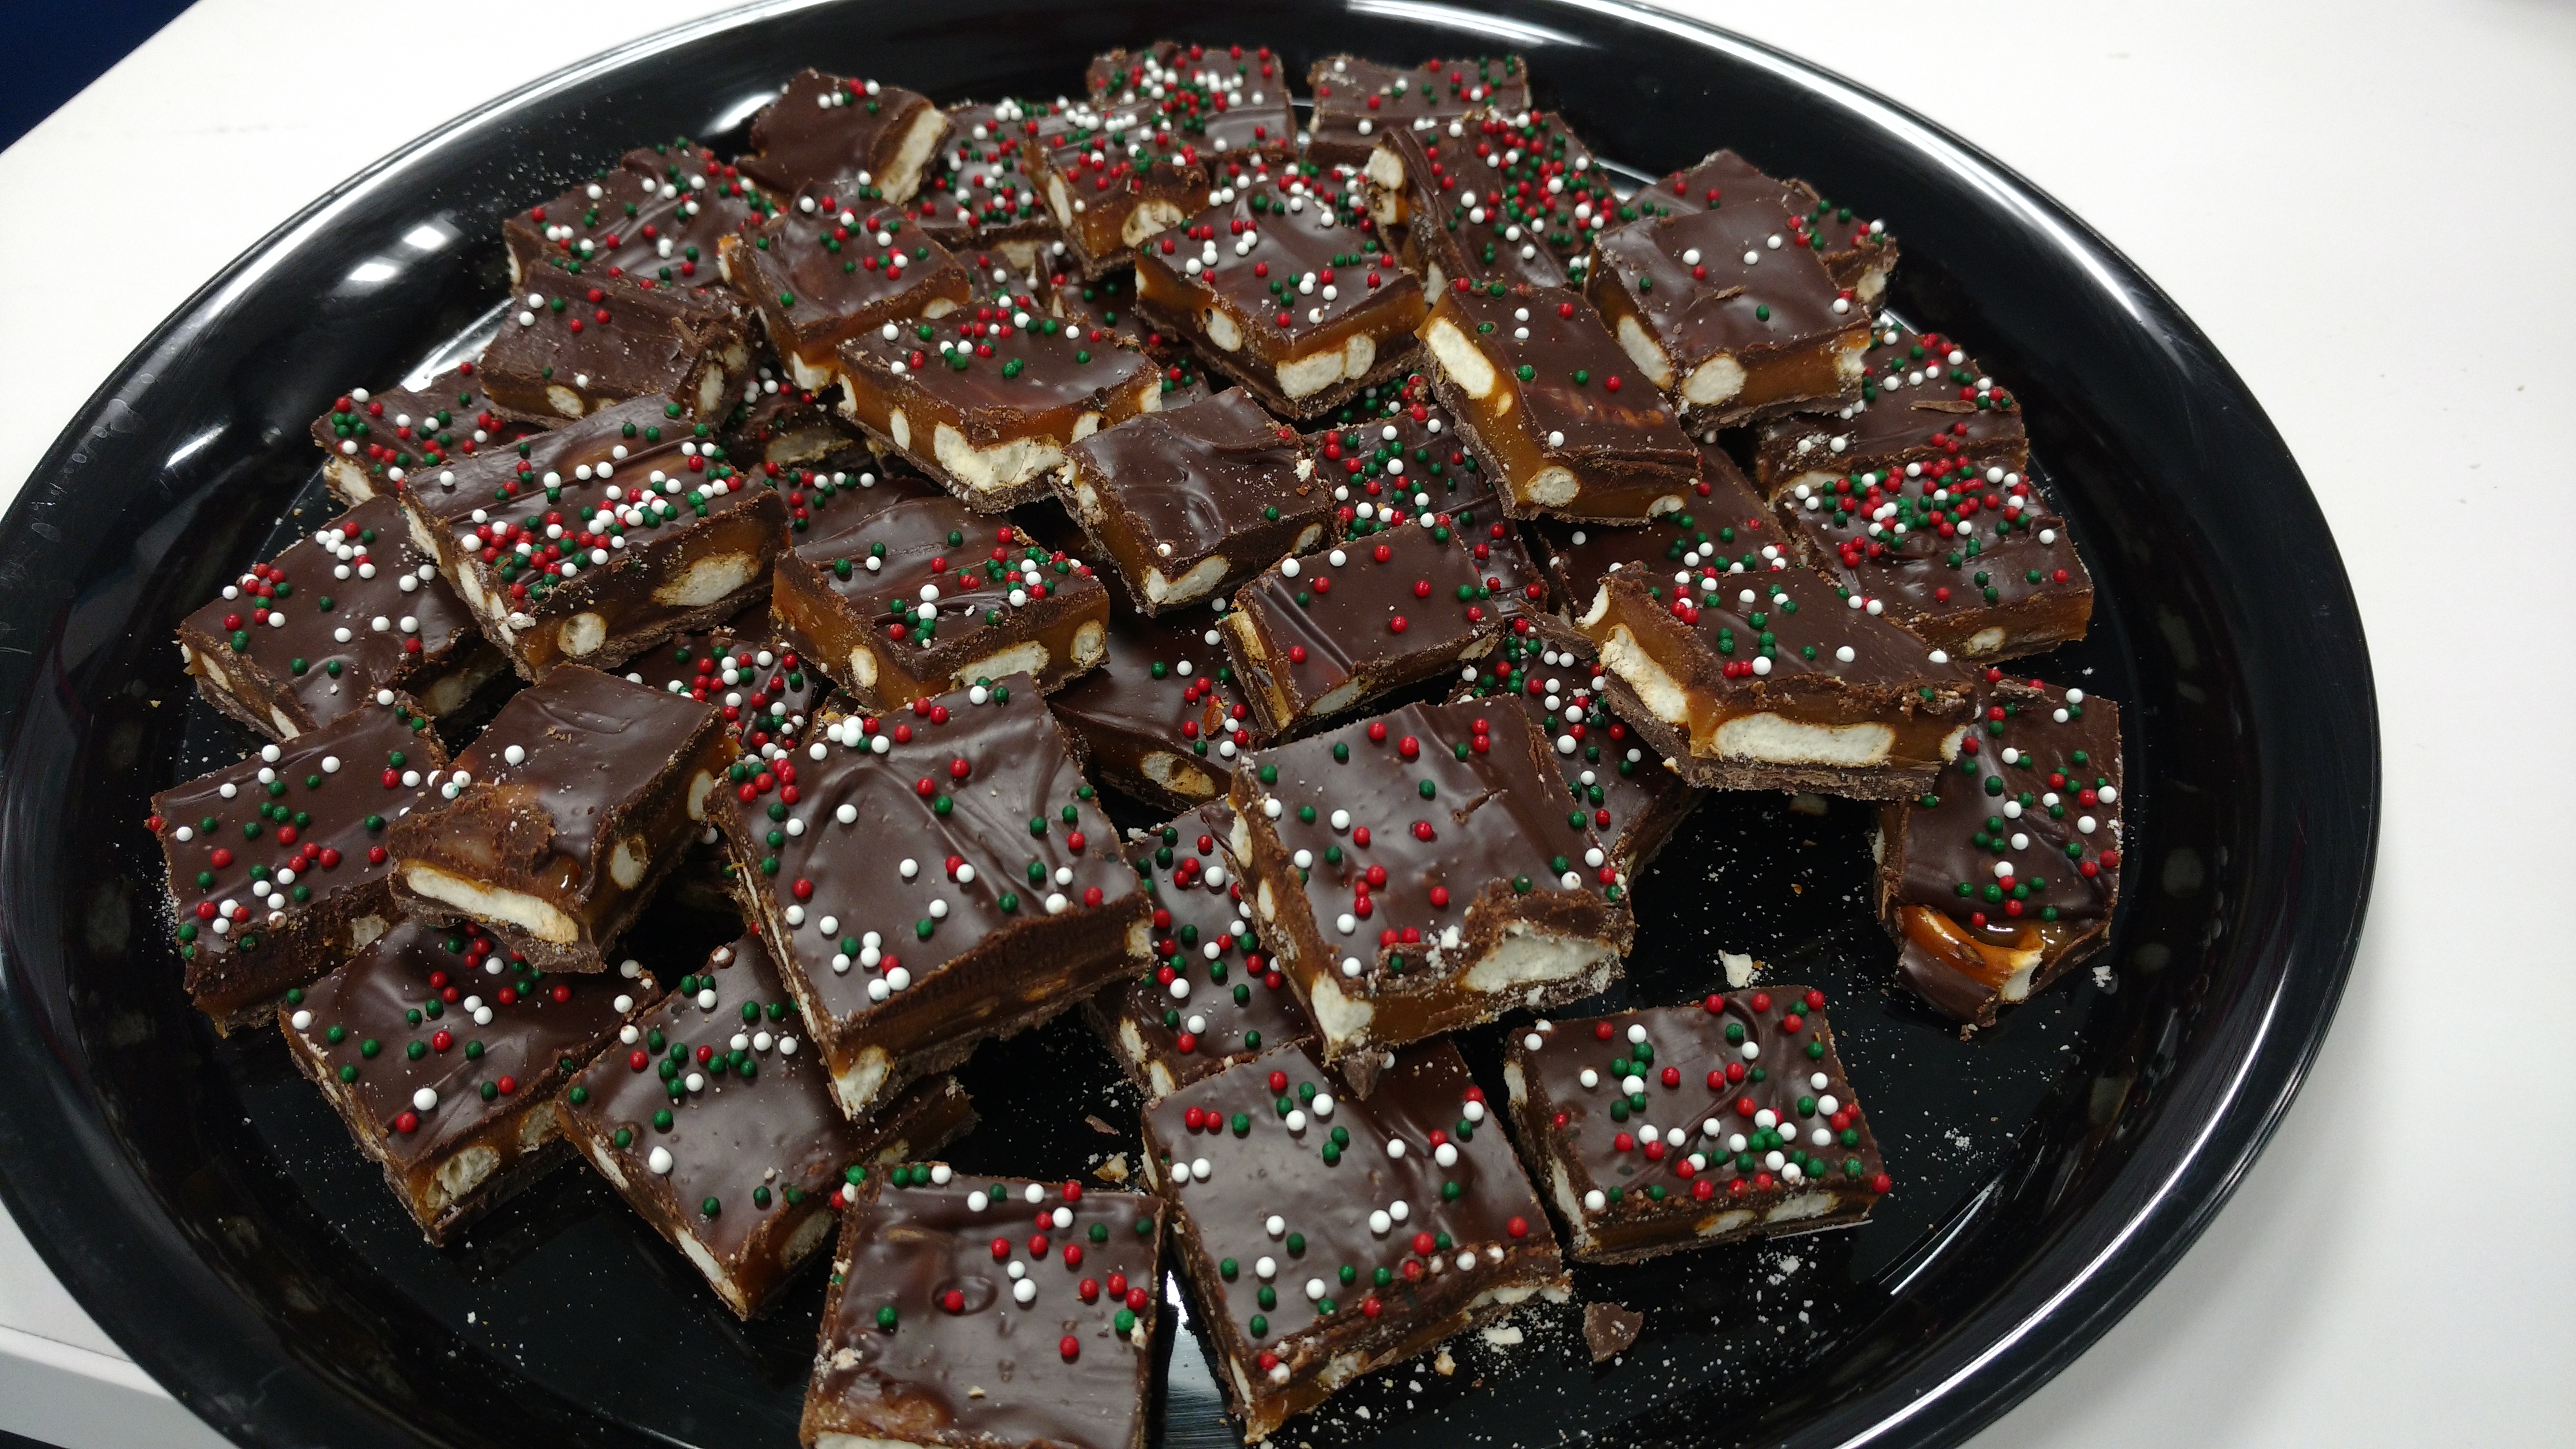 Tray of chocolate pretzel bark bites with red and green sprinkles